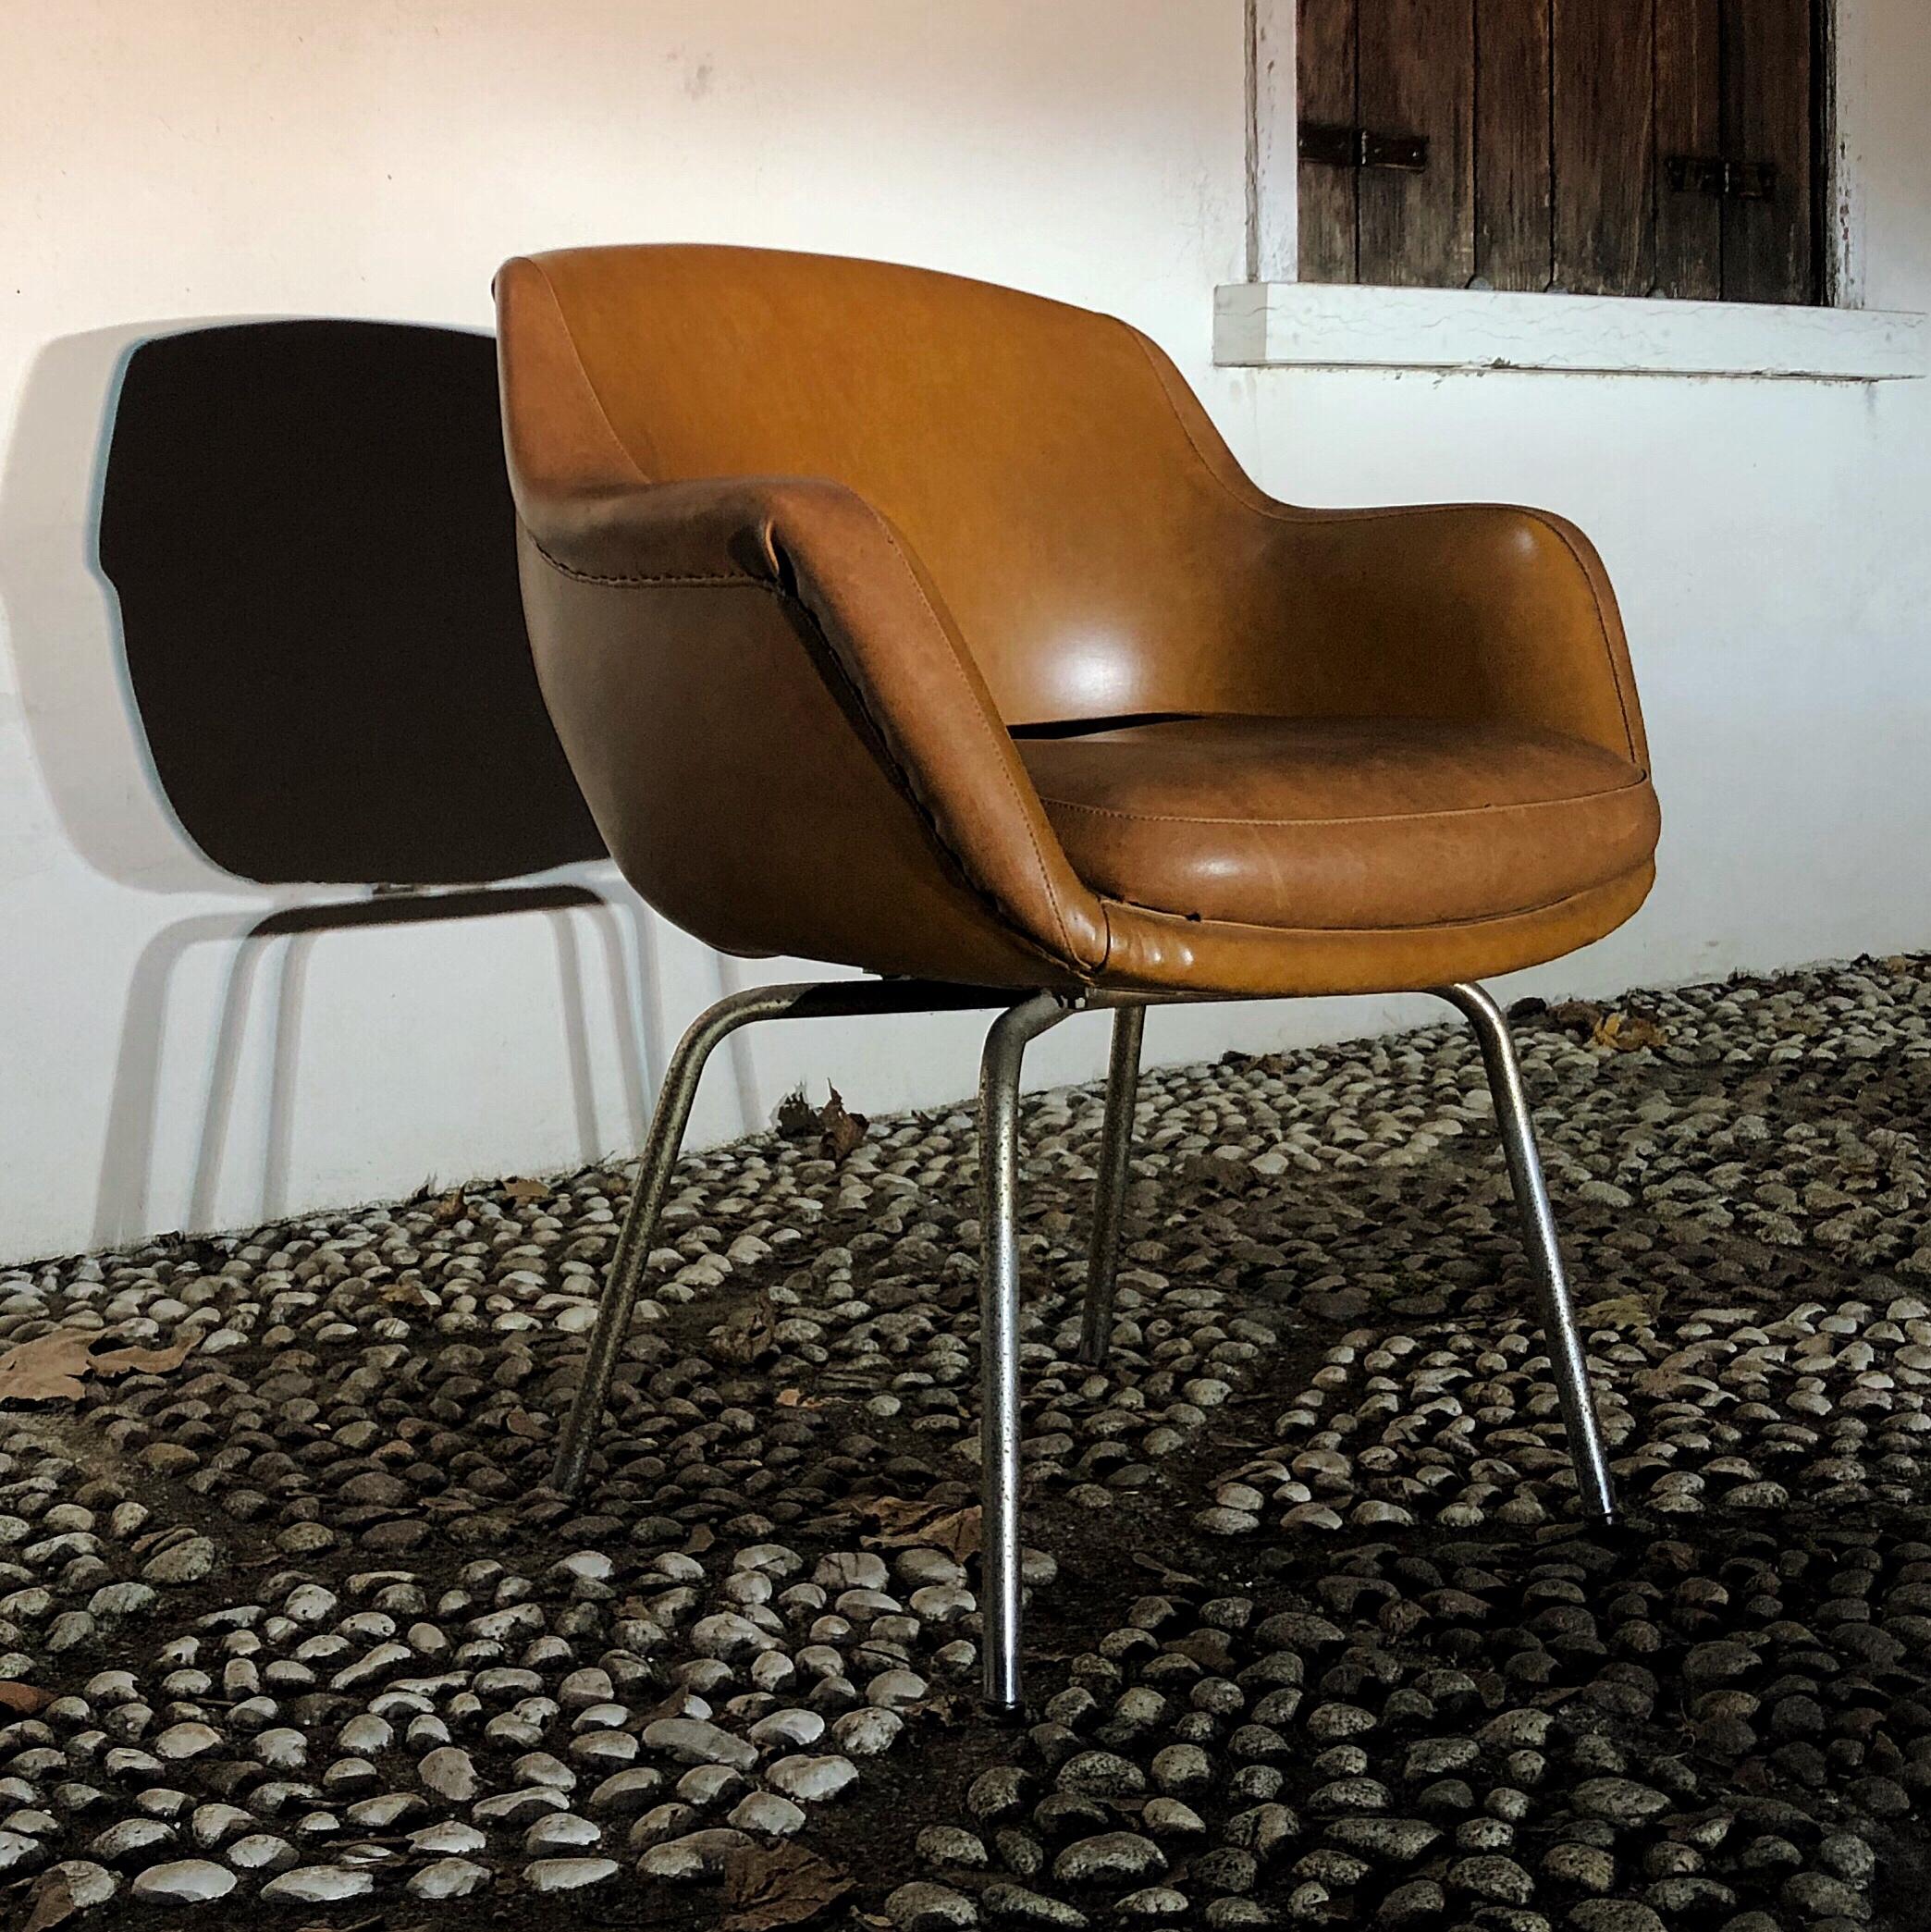 Pair of Midcentury Brown Leather Armchairs in the Style of Arne Jacobsen, 1960s For Sale 7